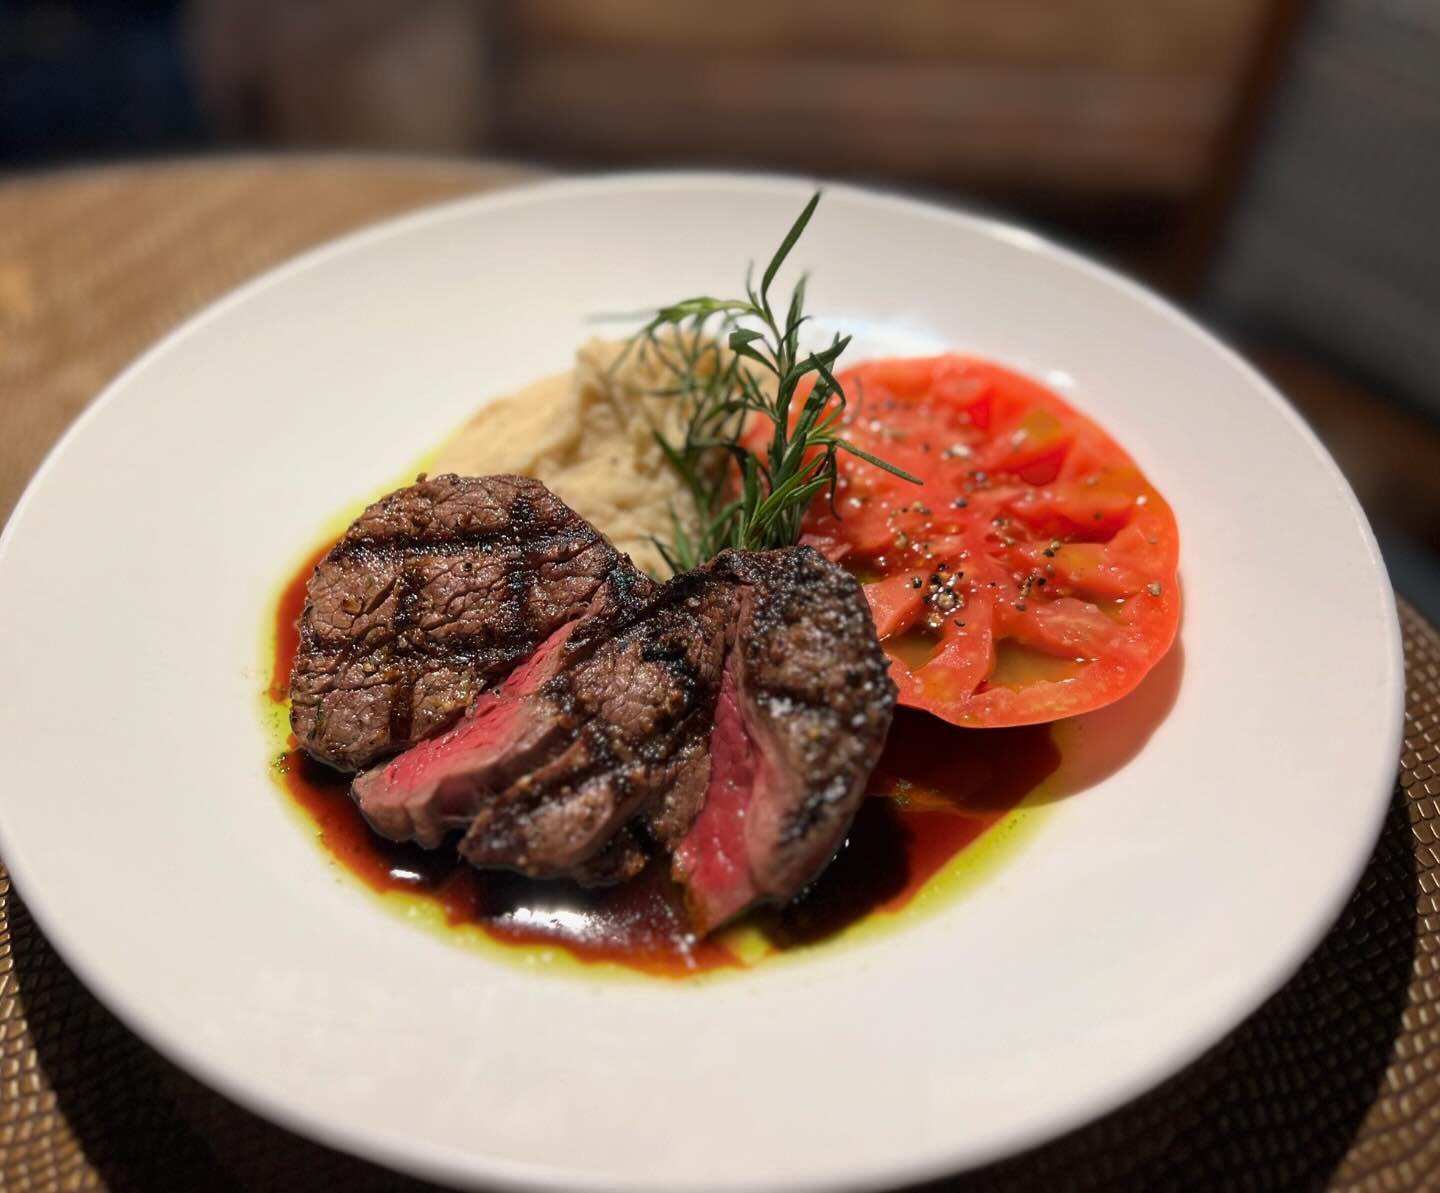 We are big fans of summer flavors, this Grilled Beef Tenderloin with Marinated Garden Tomato and Butterbean Rosemary Mash hits the spot! Pop over this weekend for your taste #lodgestyle #dinner #sundayfunday #ingredientsmatter #simpleanddelicious